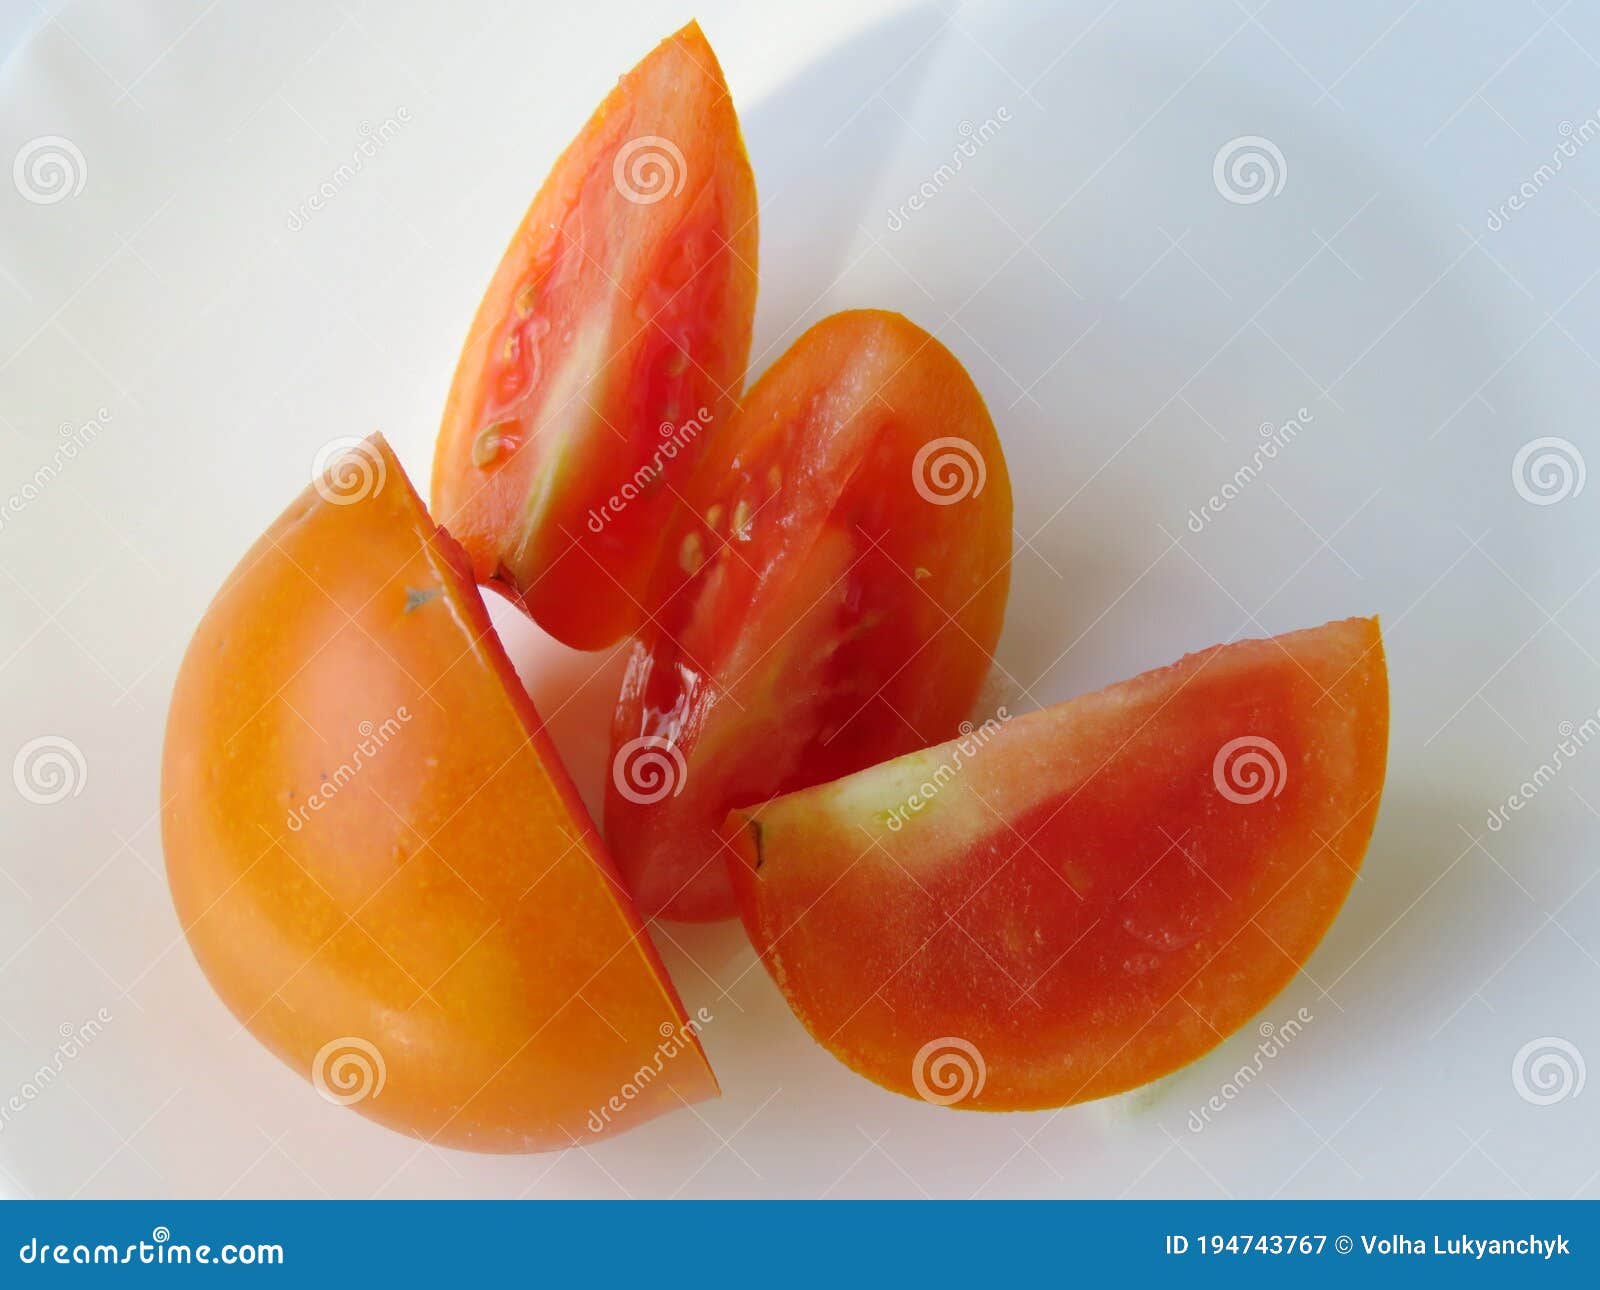 Sweet Orange Tomato on a White Plate Stock Image - Image of healthy ...